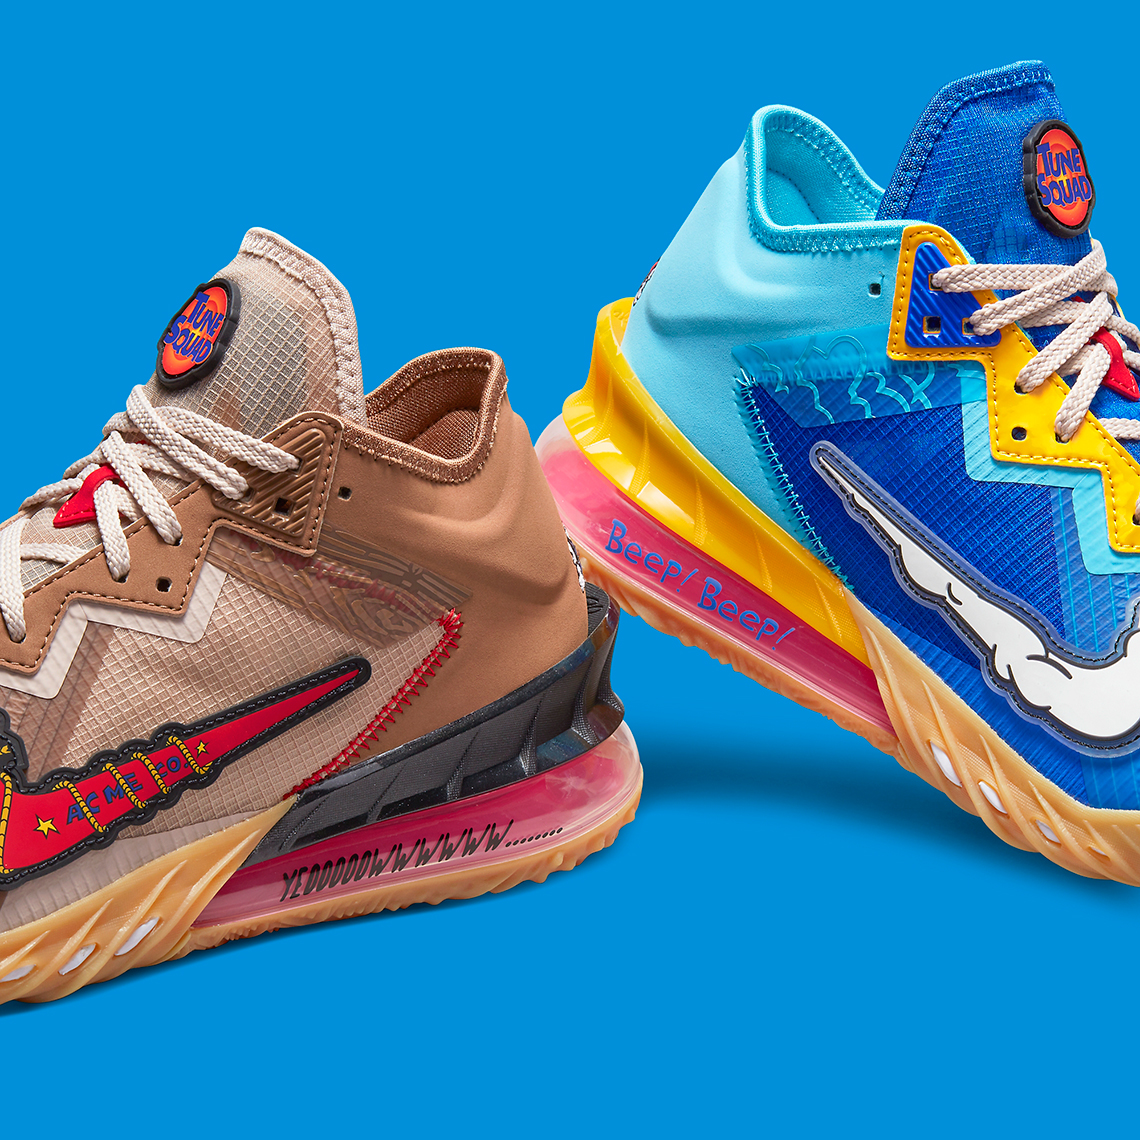 Nike Lebron 18 Low Road Runner Wile E Coyote Cv7562 401 Release Date 7